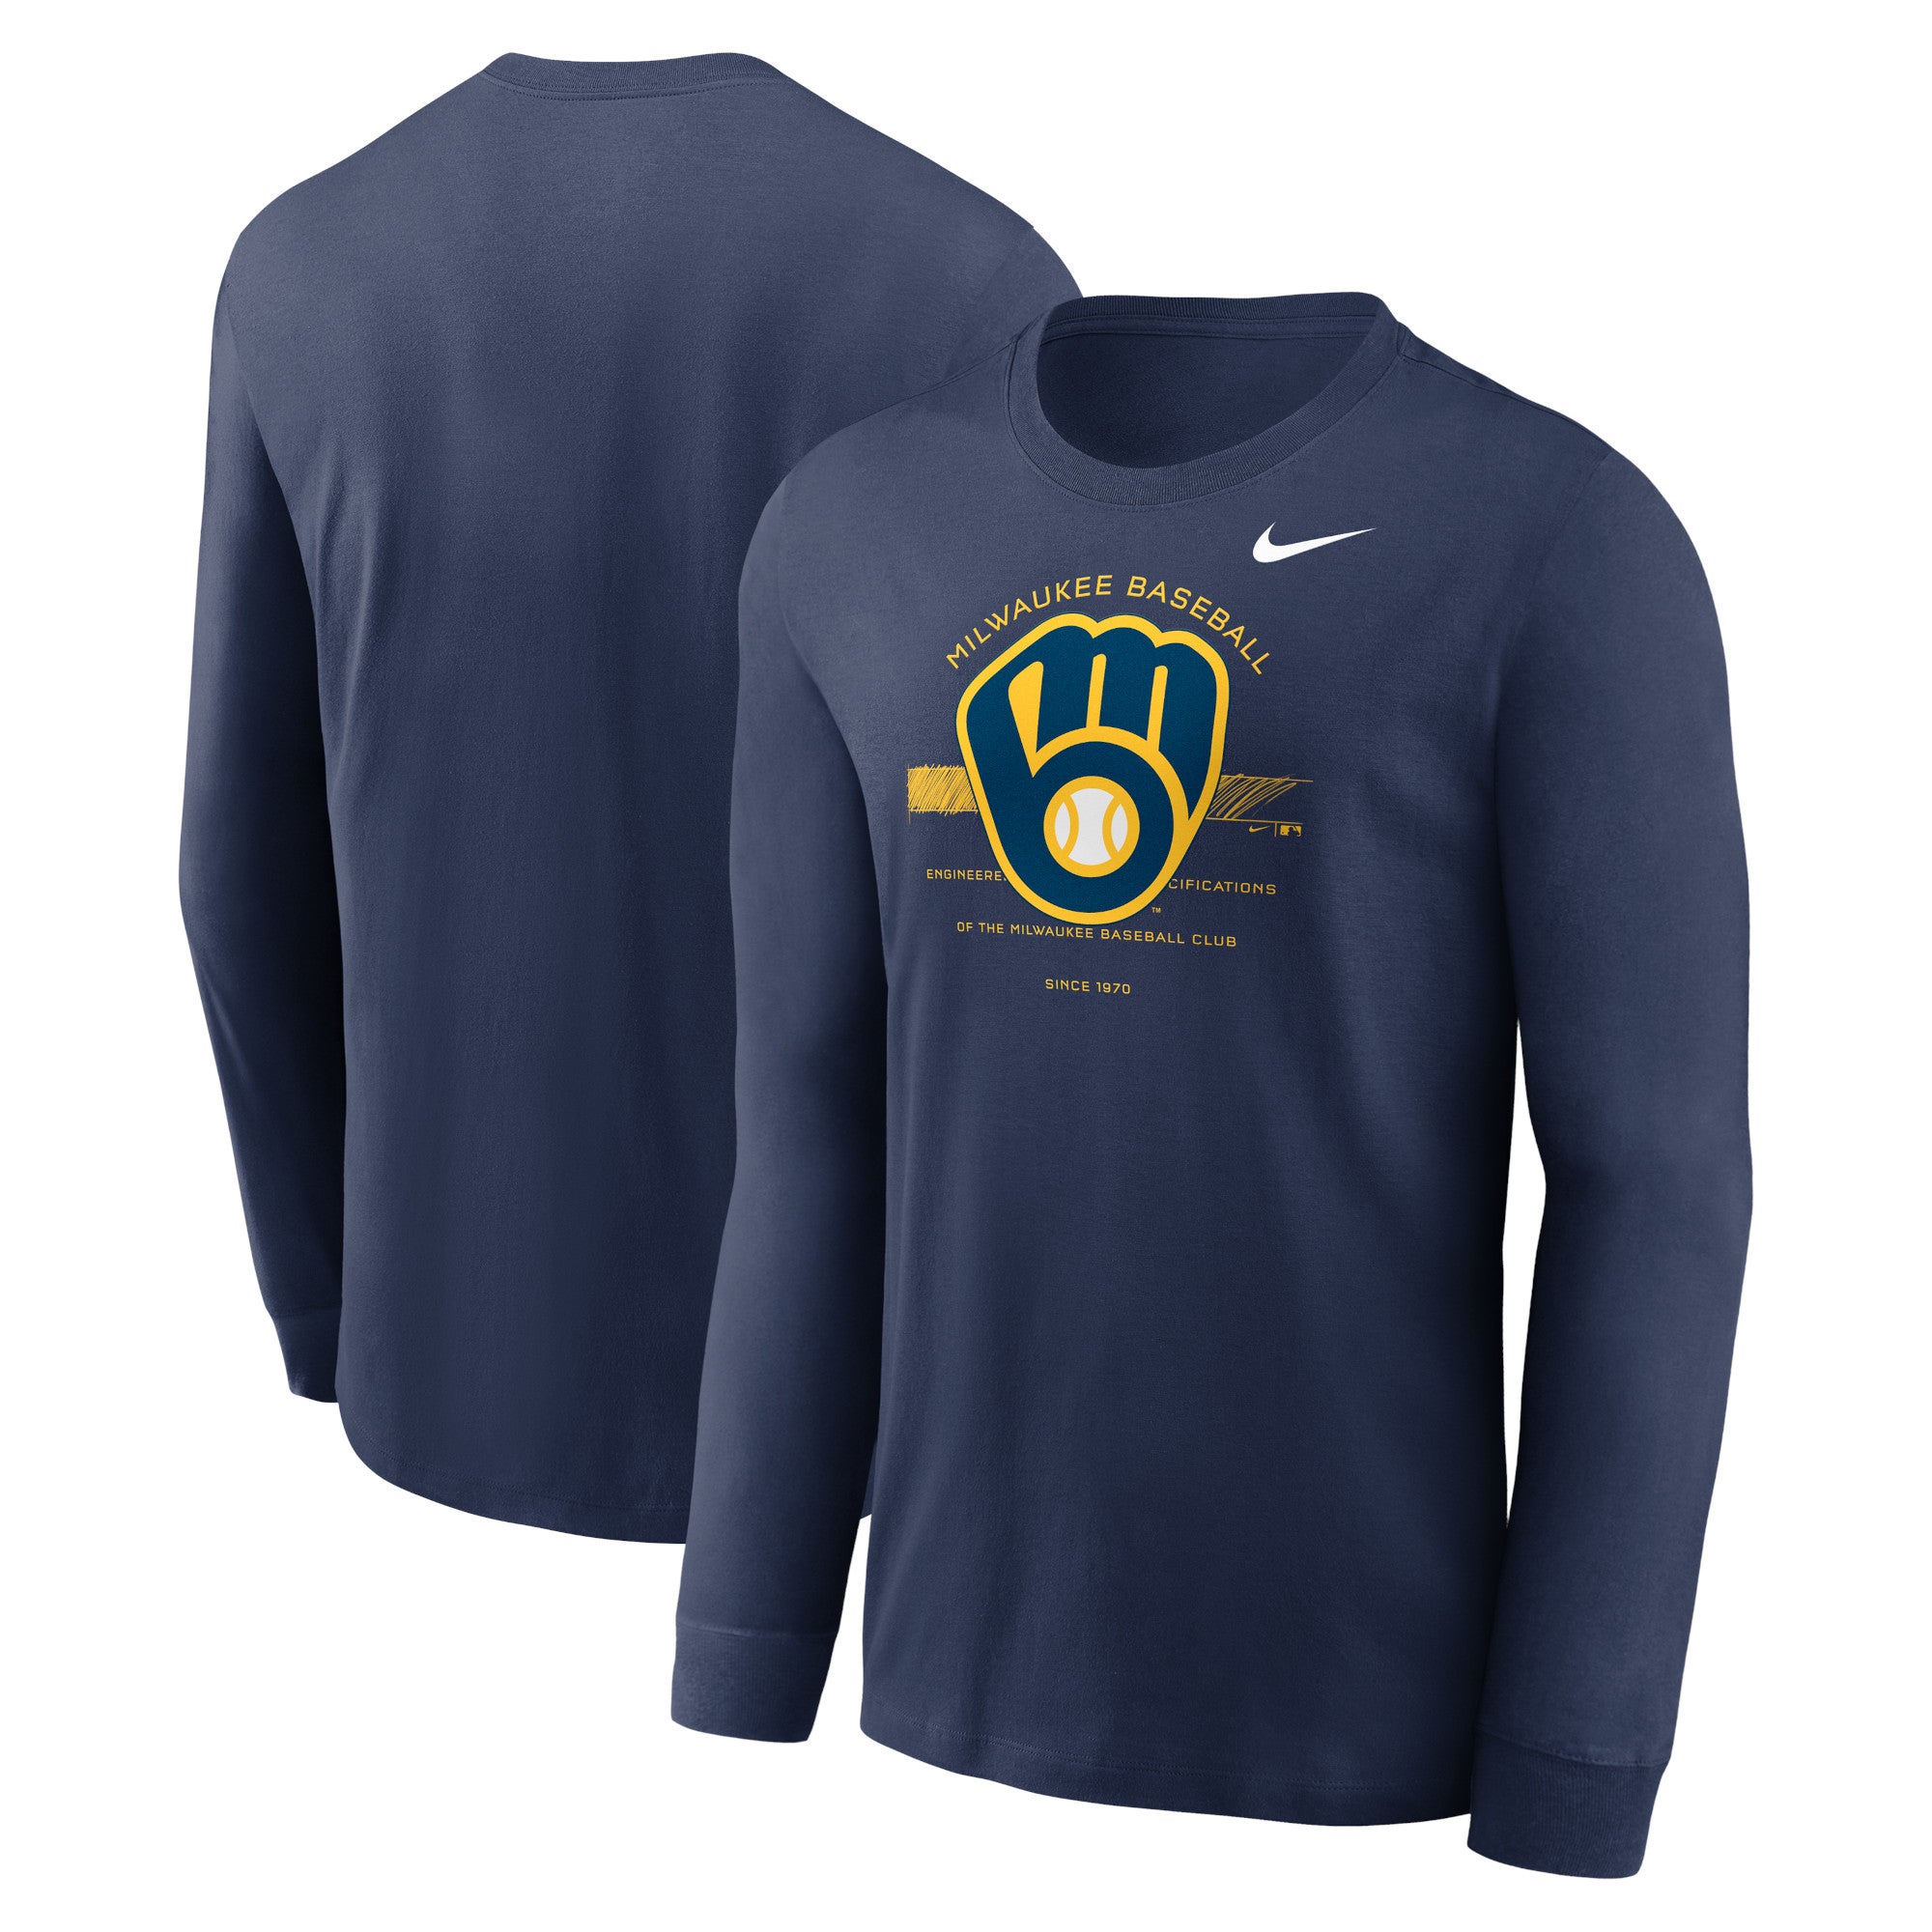 Nike Brewers Over Arch Long Sleeve T-Shirt